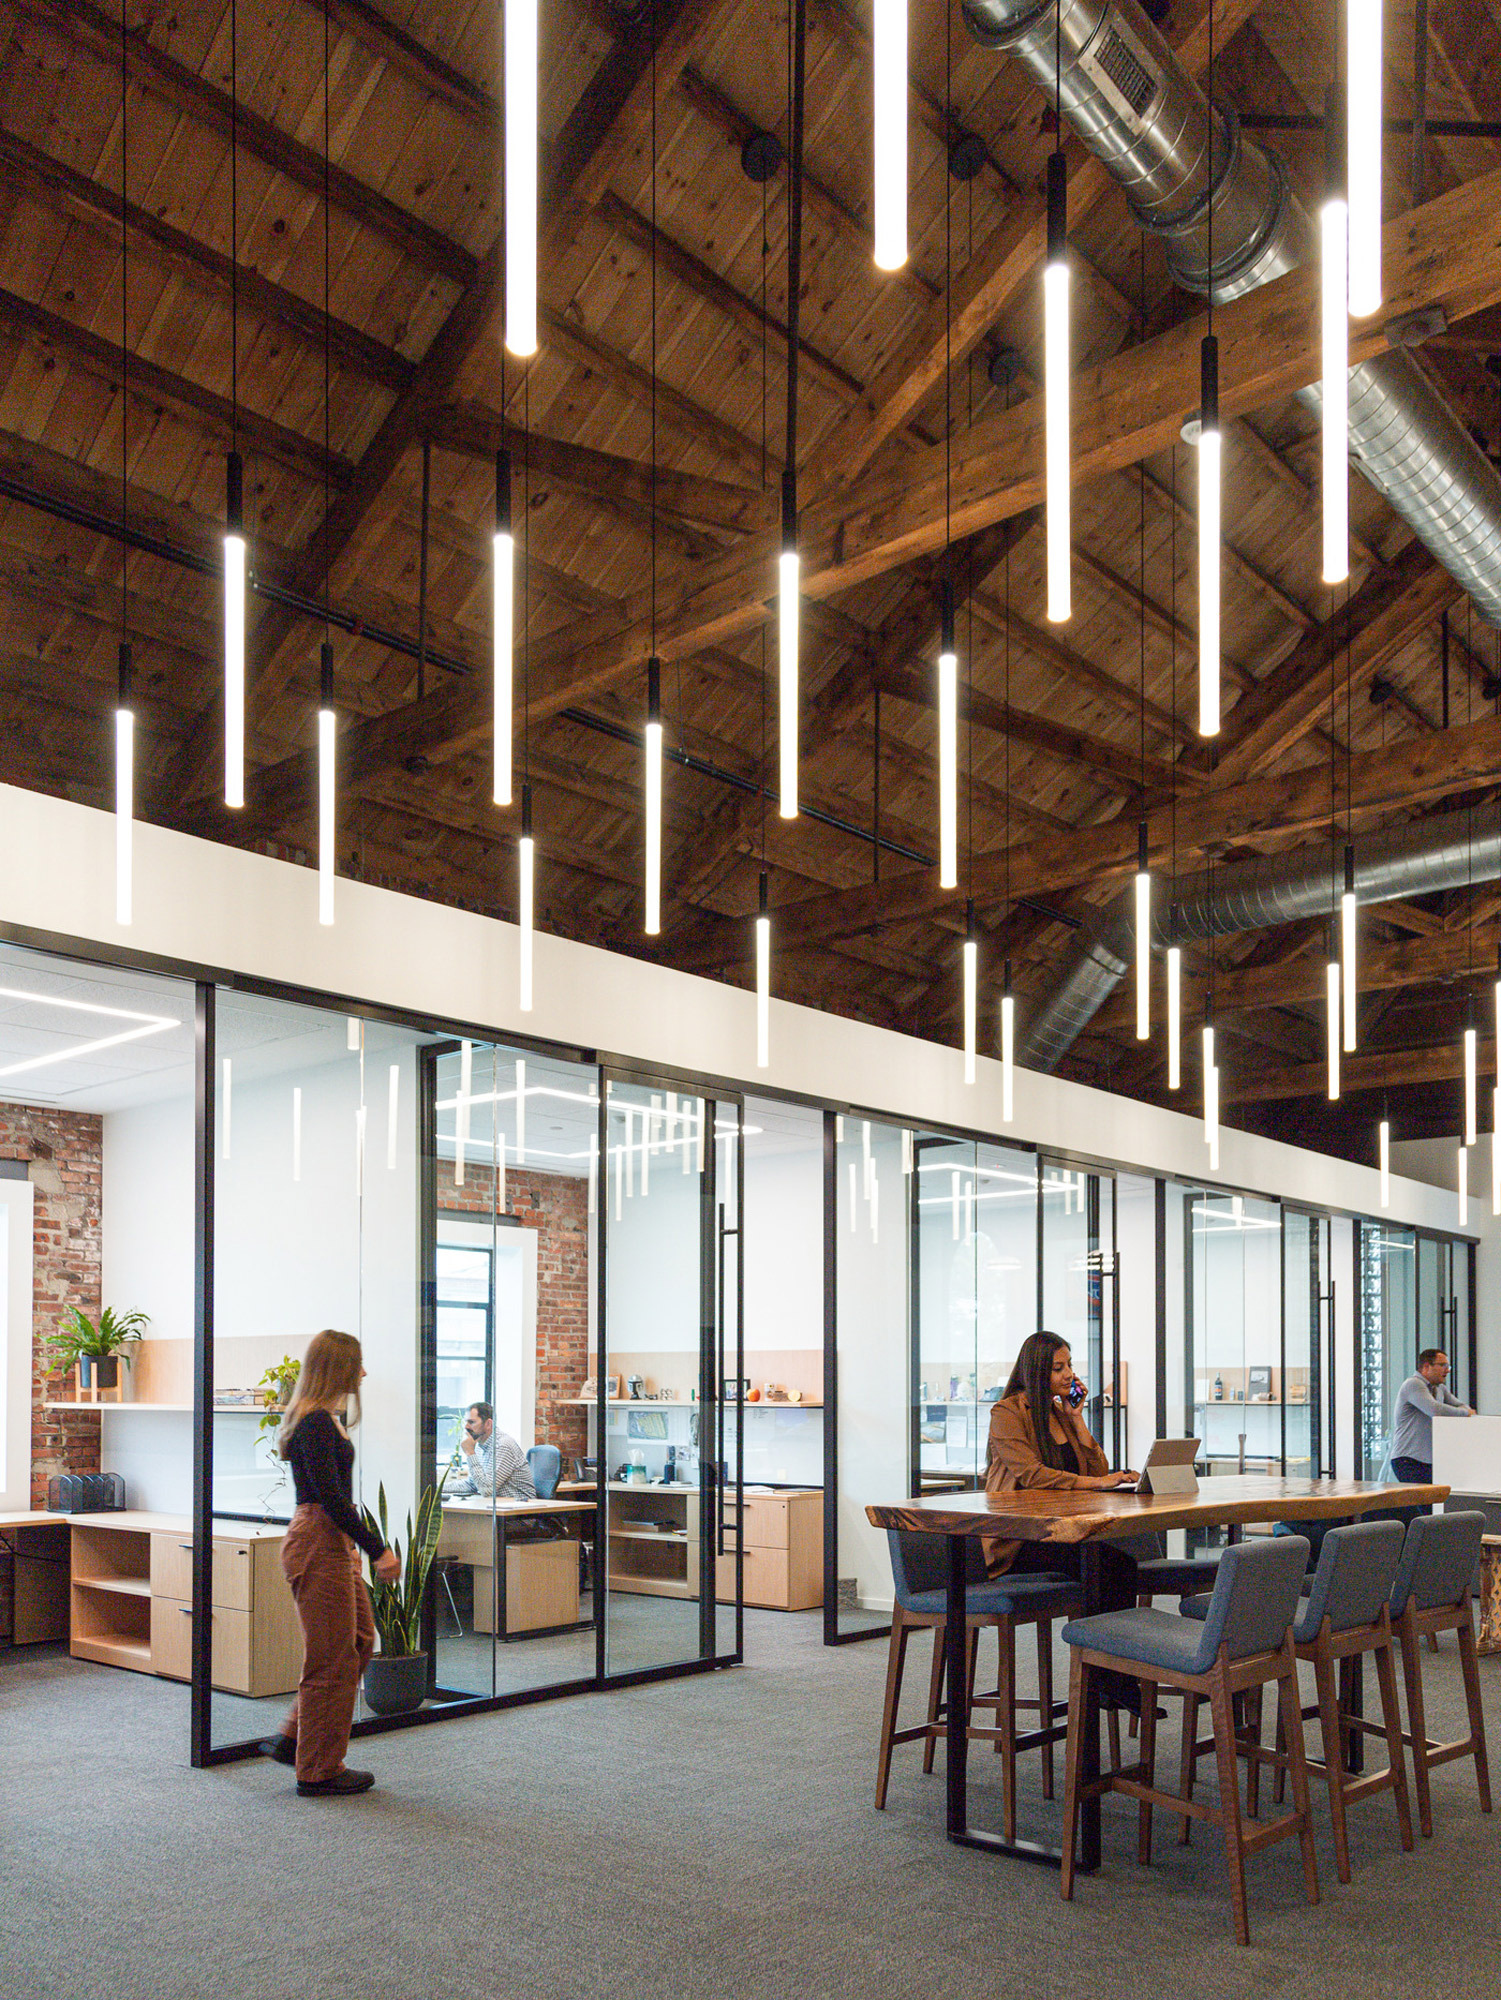 Modern open-plan office space with exposed wooden beams and ductwork, featuring sleek, suspended LED lighting. Glass-walled private offices flank the communal area with employees engaged at workstations and in casual seating.